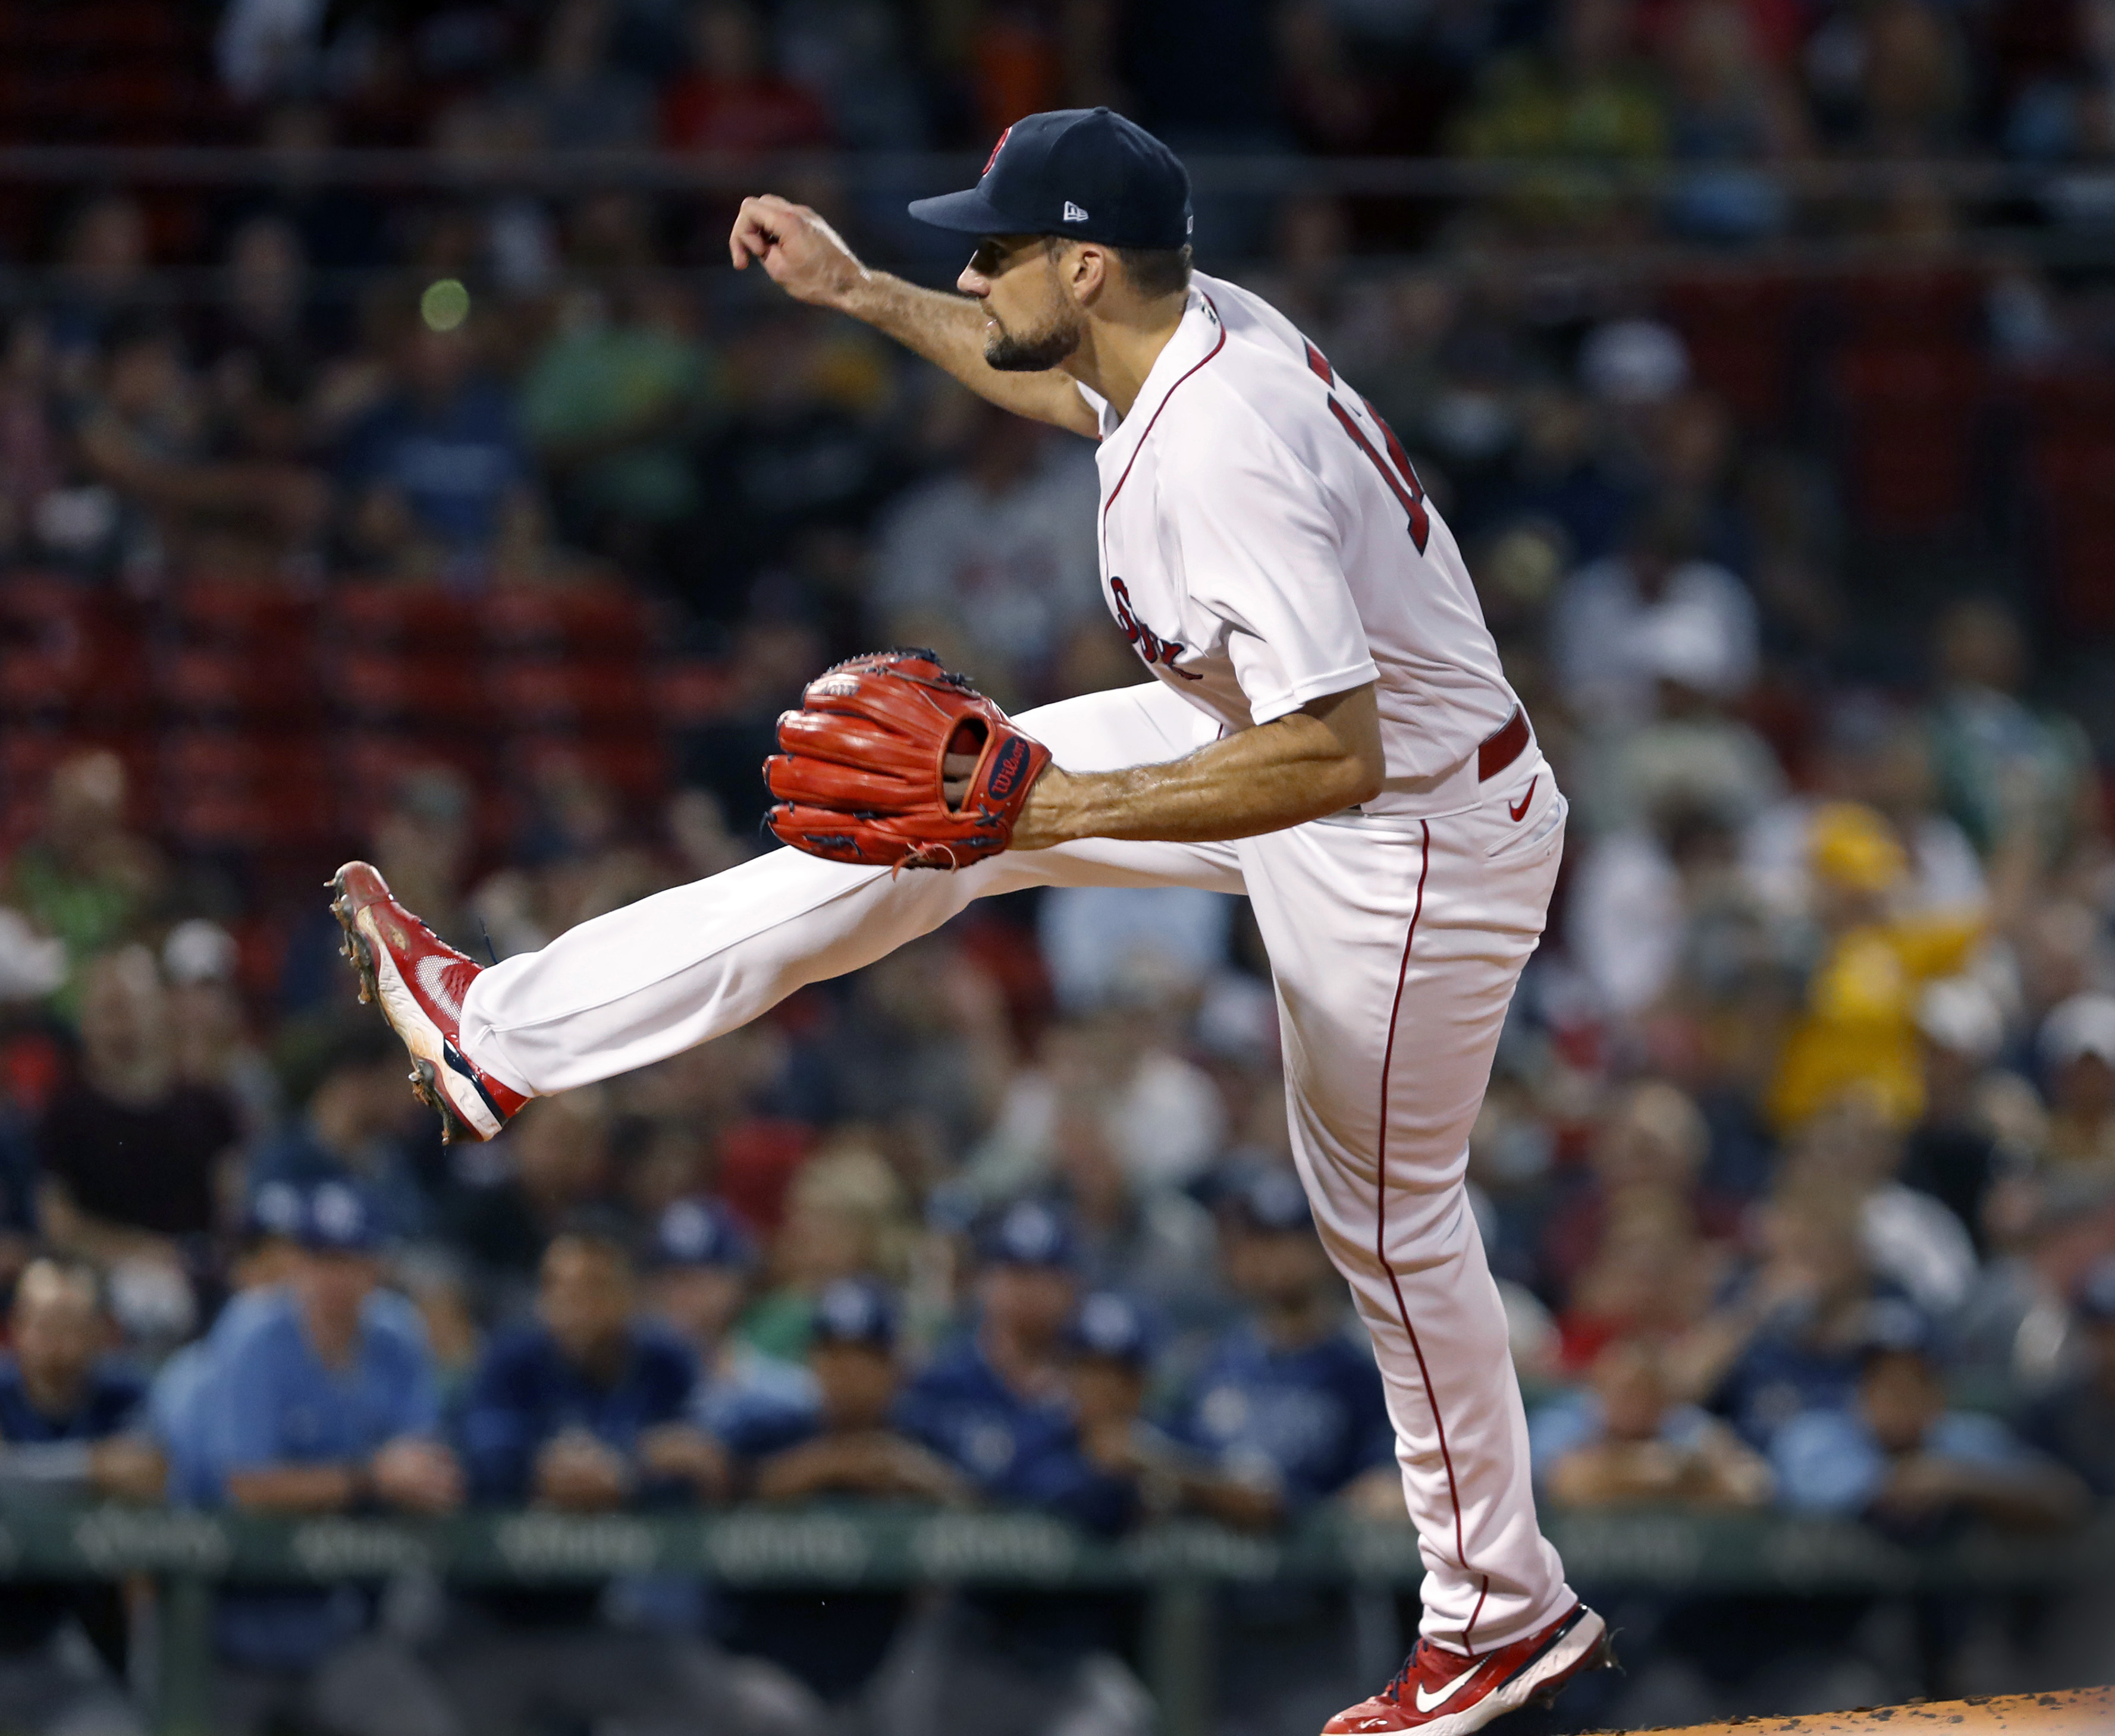 Nathan Eovaldi's excellent first spring start shows potential